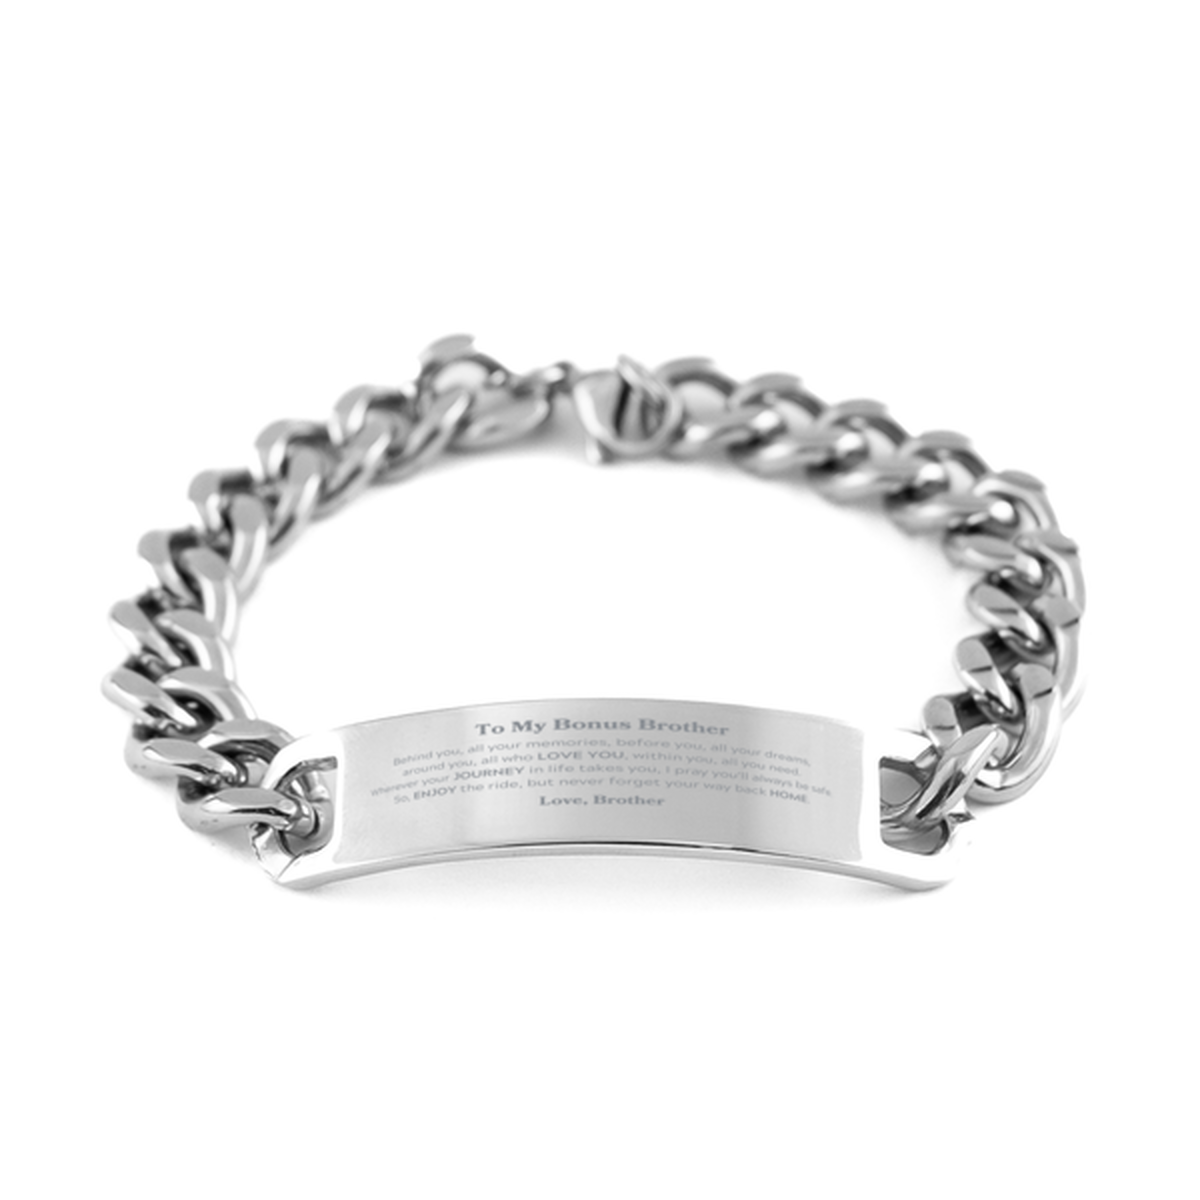 To My Bonus Brother Graduation Gifts from Brother, Bonus Brother Cuban Chain Stainless Steel Bracelet Christmas Birthday Gifts for Bonus Brother Behind you, all your memories, before you, all your dreams. Love, Brother